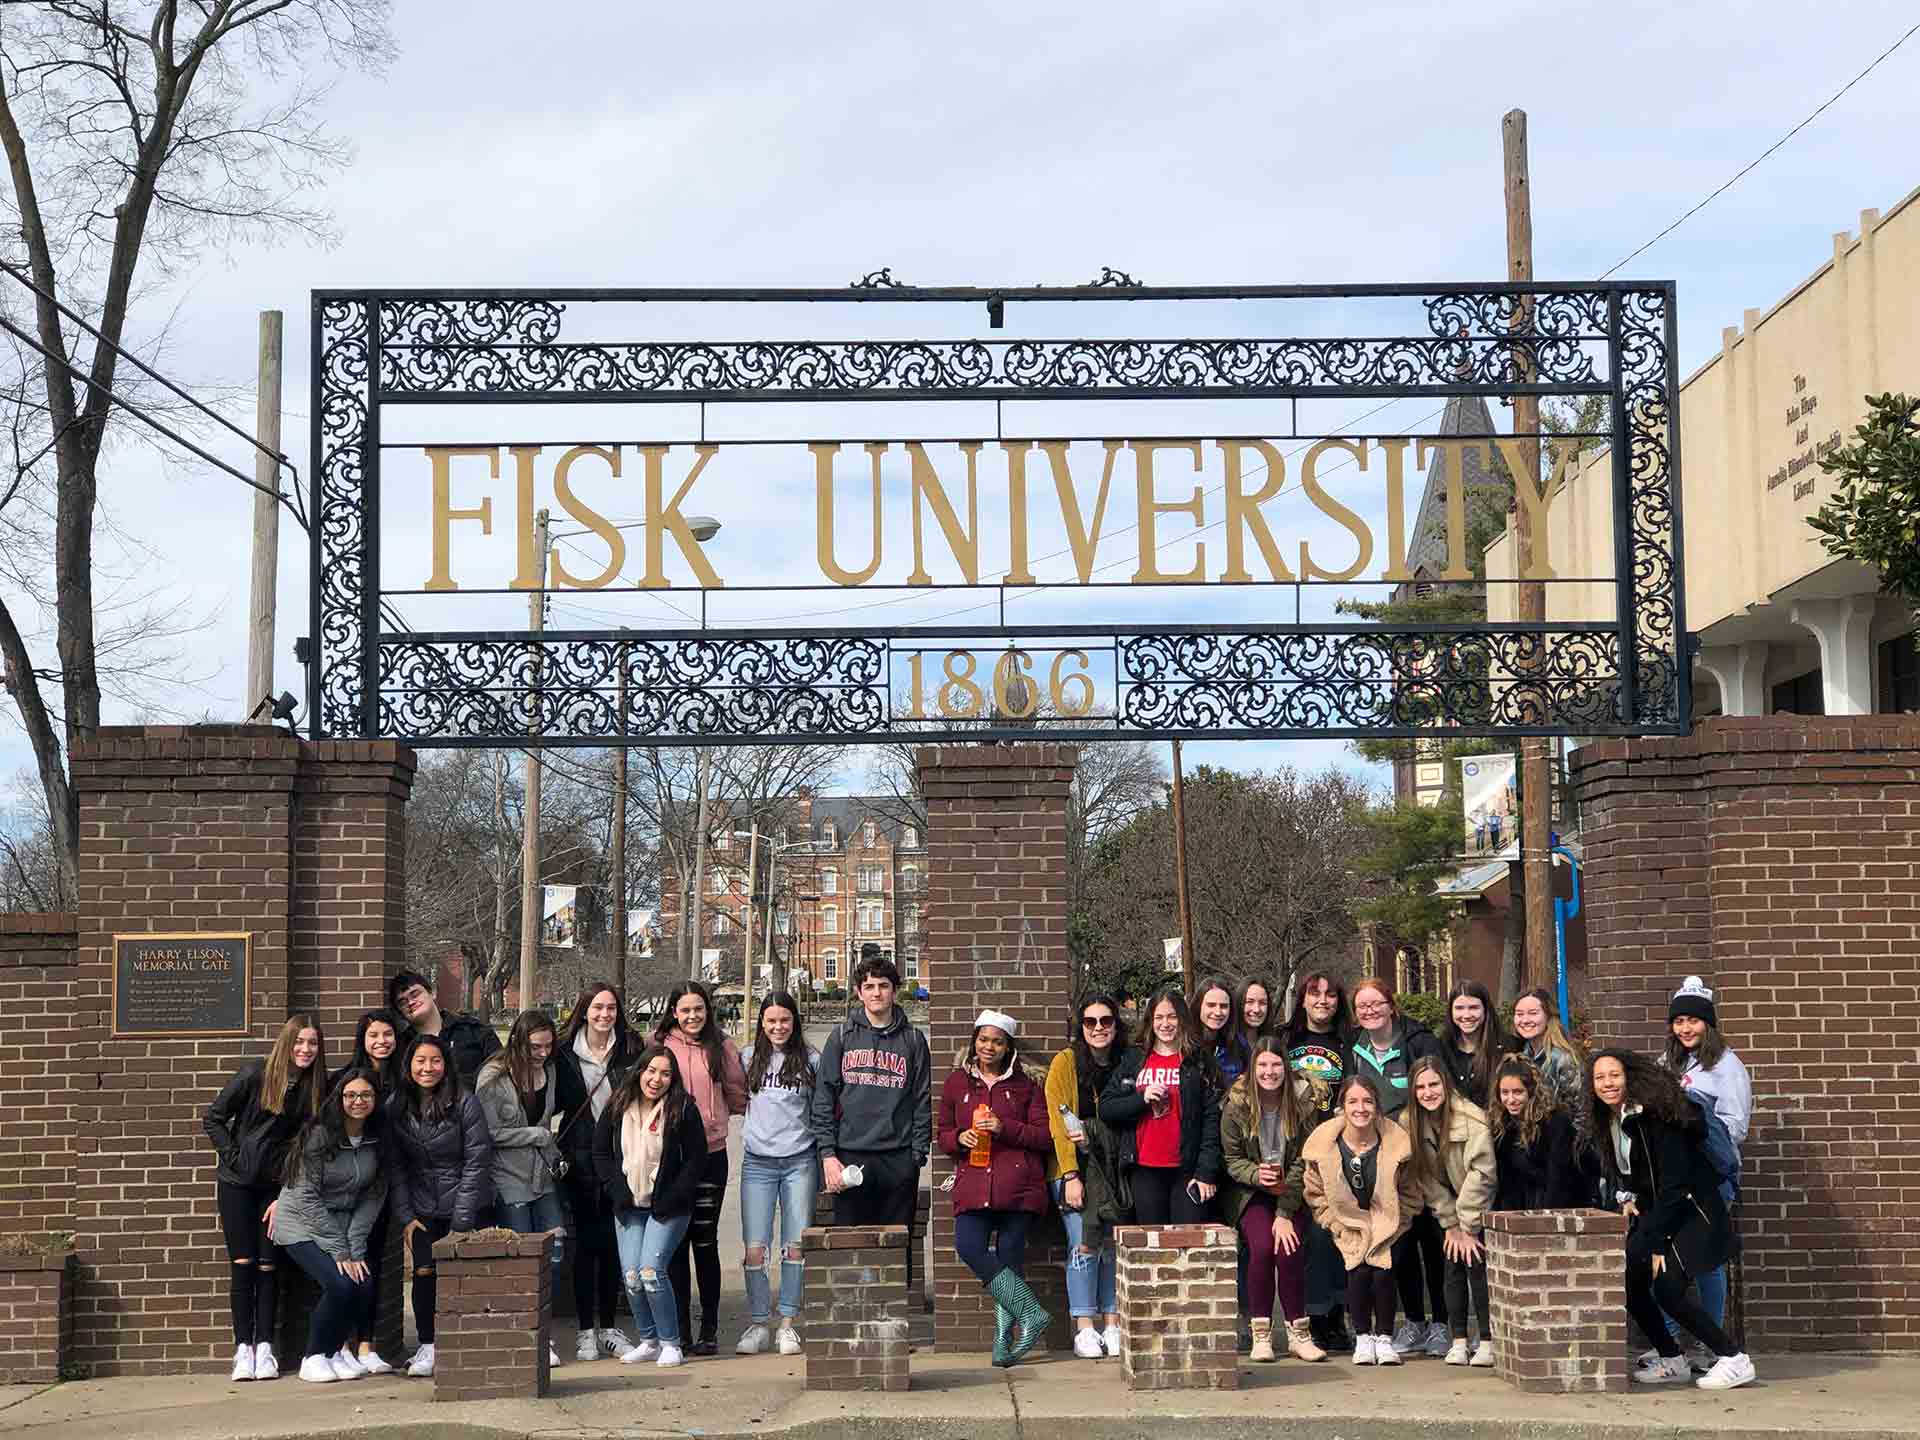 2020-explore-college-tour-fisk-university-sign-with-students-underneath